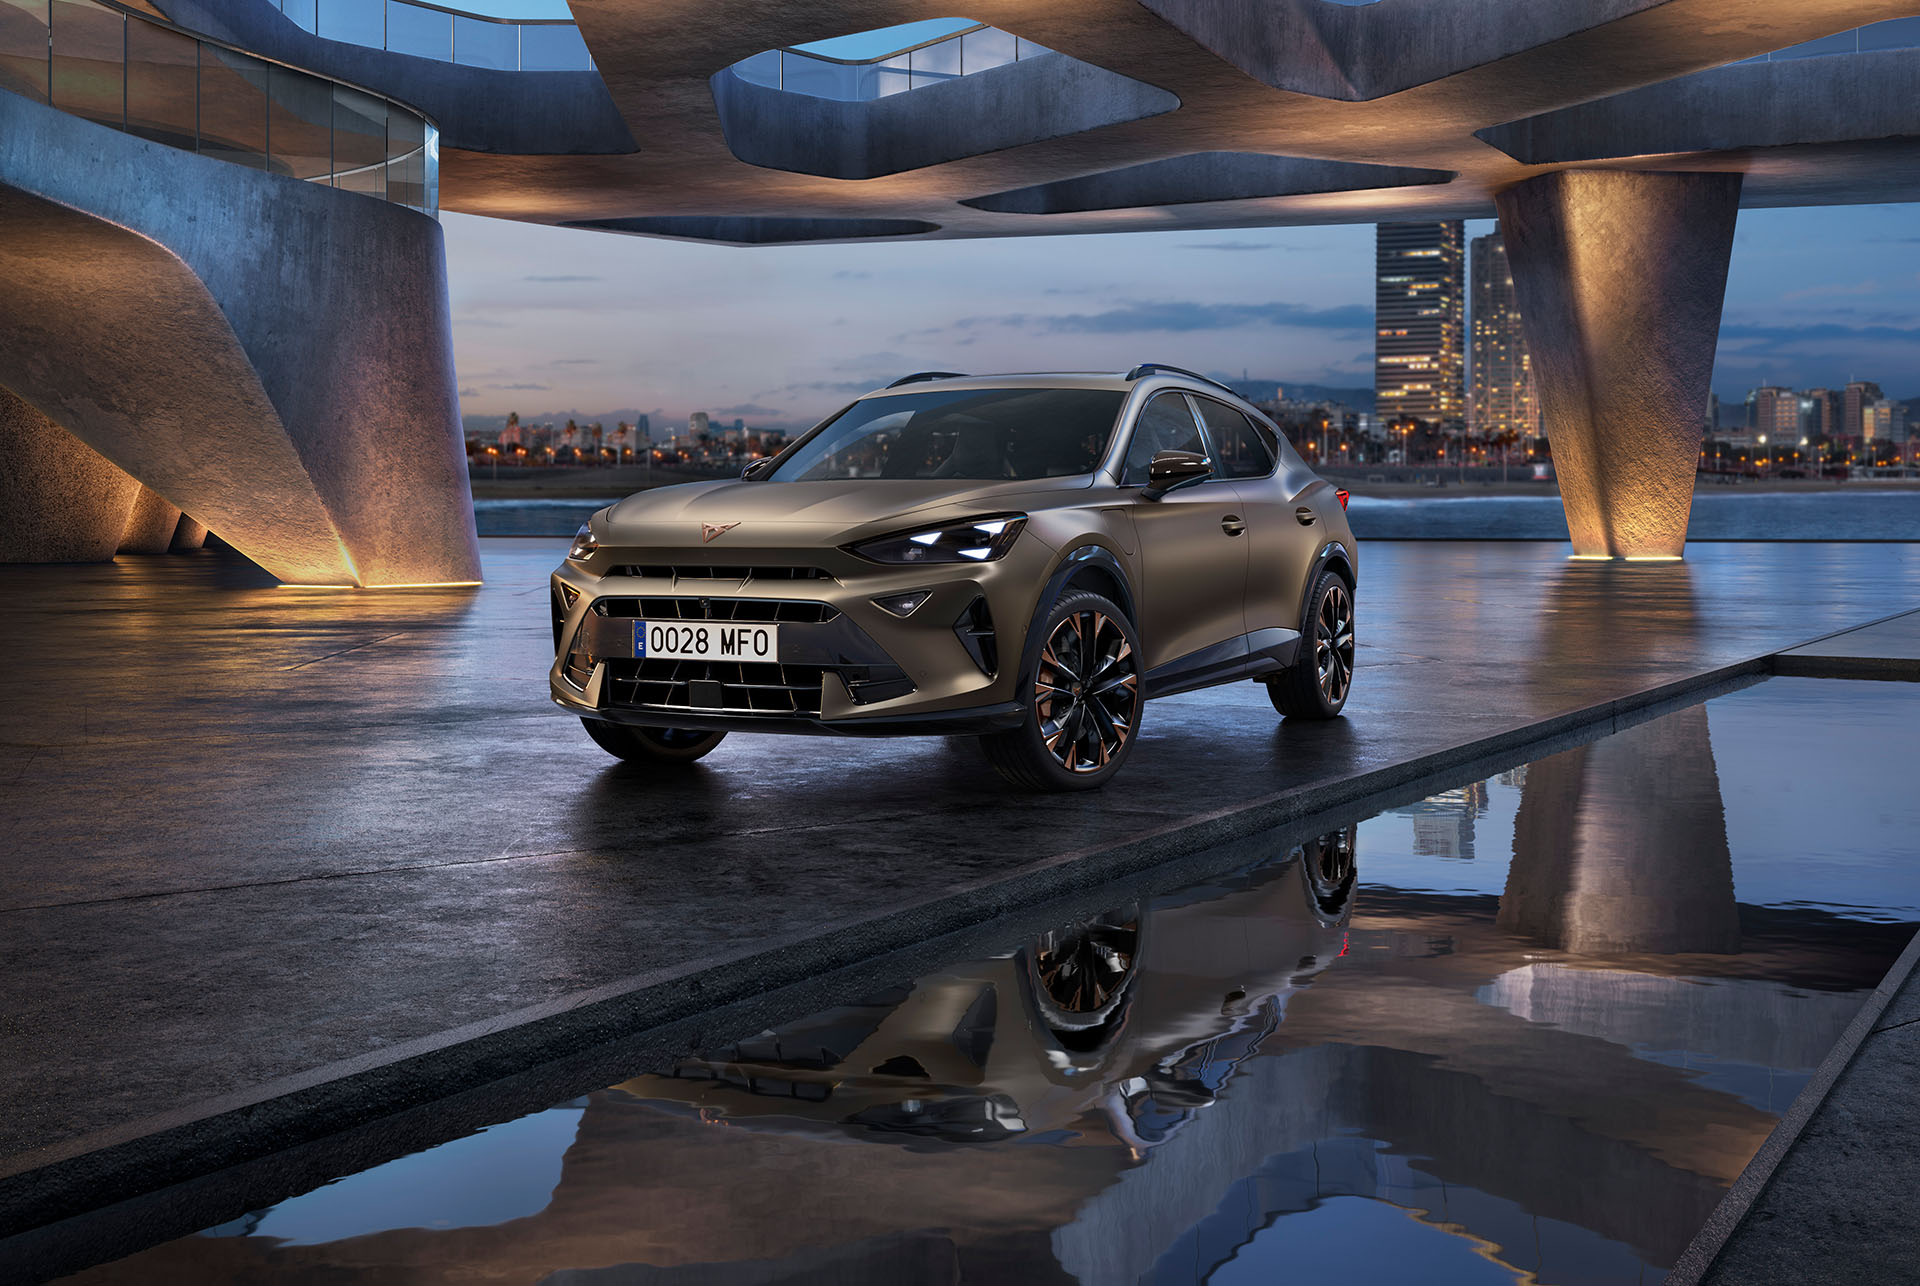 A CUPRA Formentor CUV 2024 technology. The car with copper accent wheels is parked under a curved concrete structure near a reflective water surface, with a twilight cityscape in the background featuring illuminated skyscrapers.